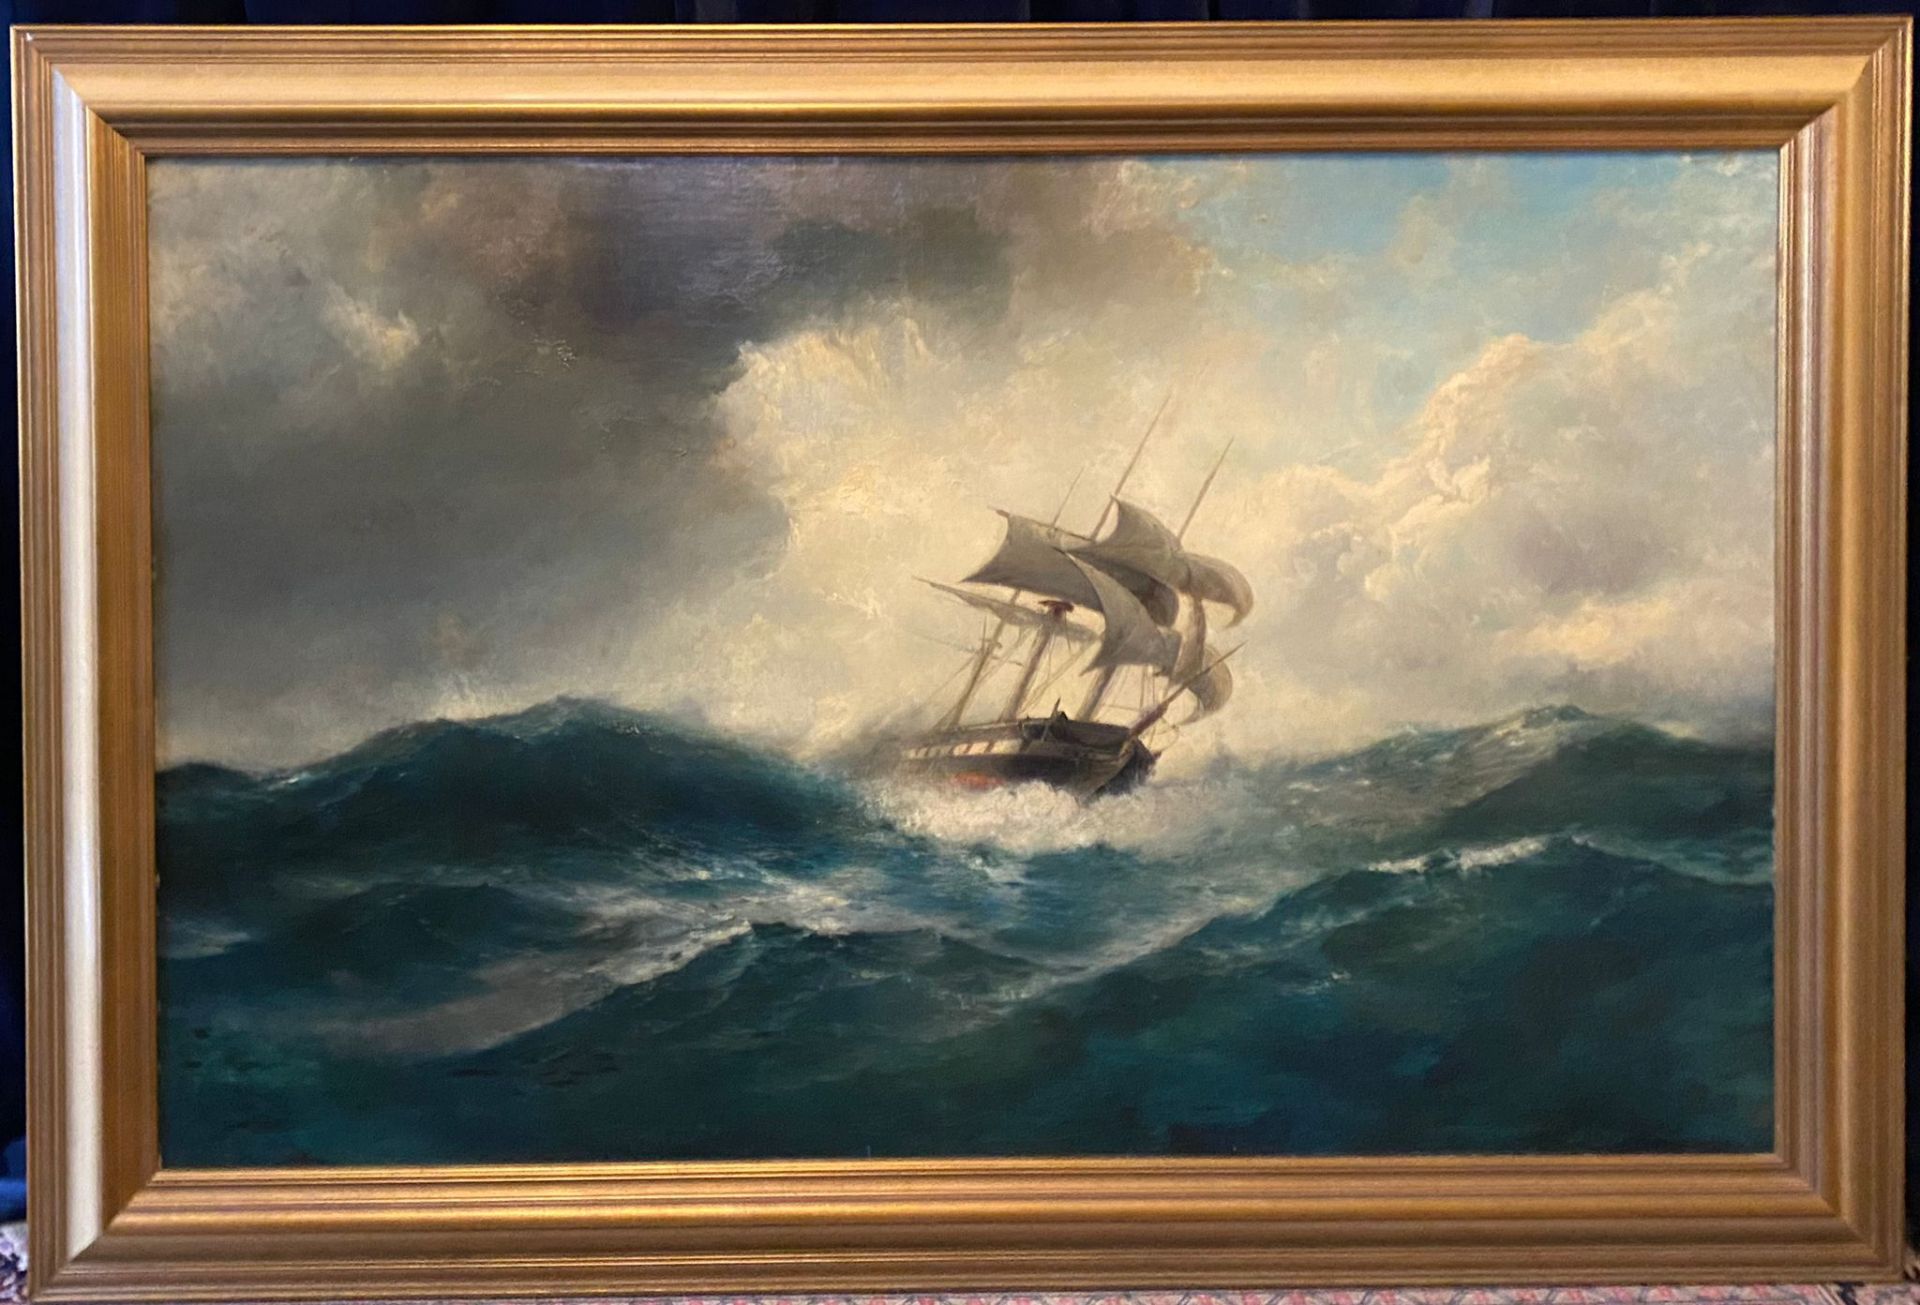 Probably Max Jensen, Ship on the high seas, oil on canvas, 19th/20th century.